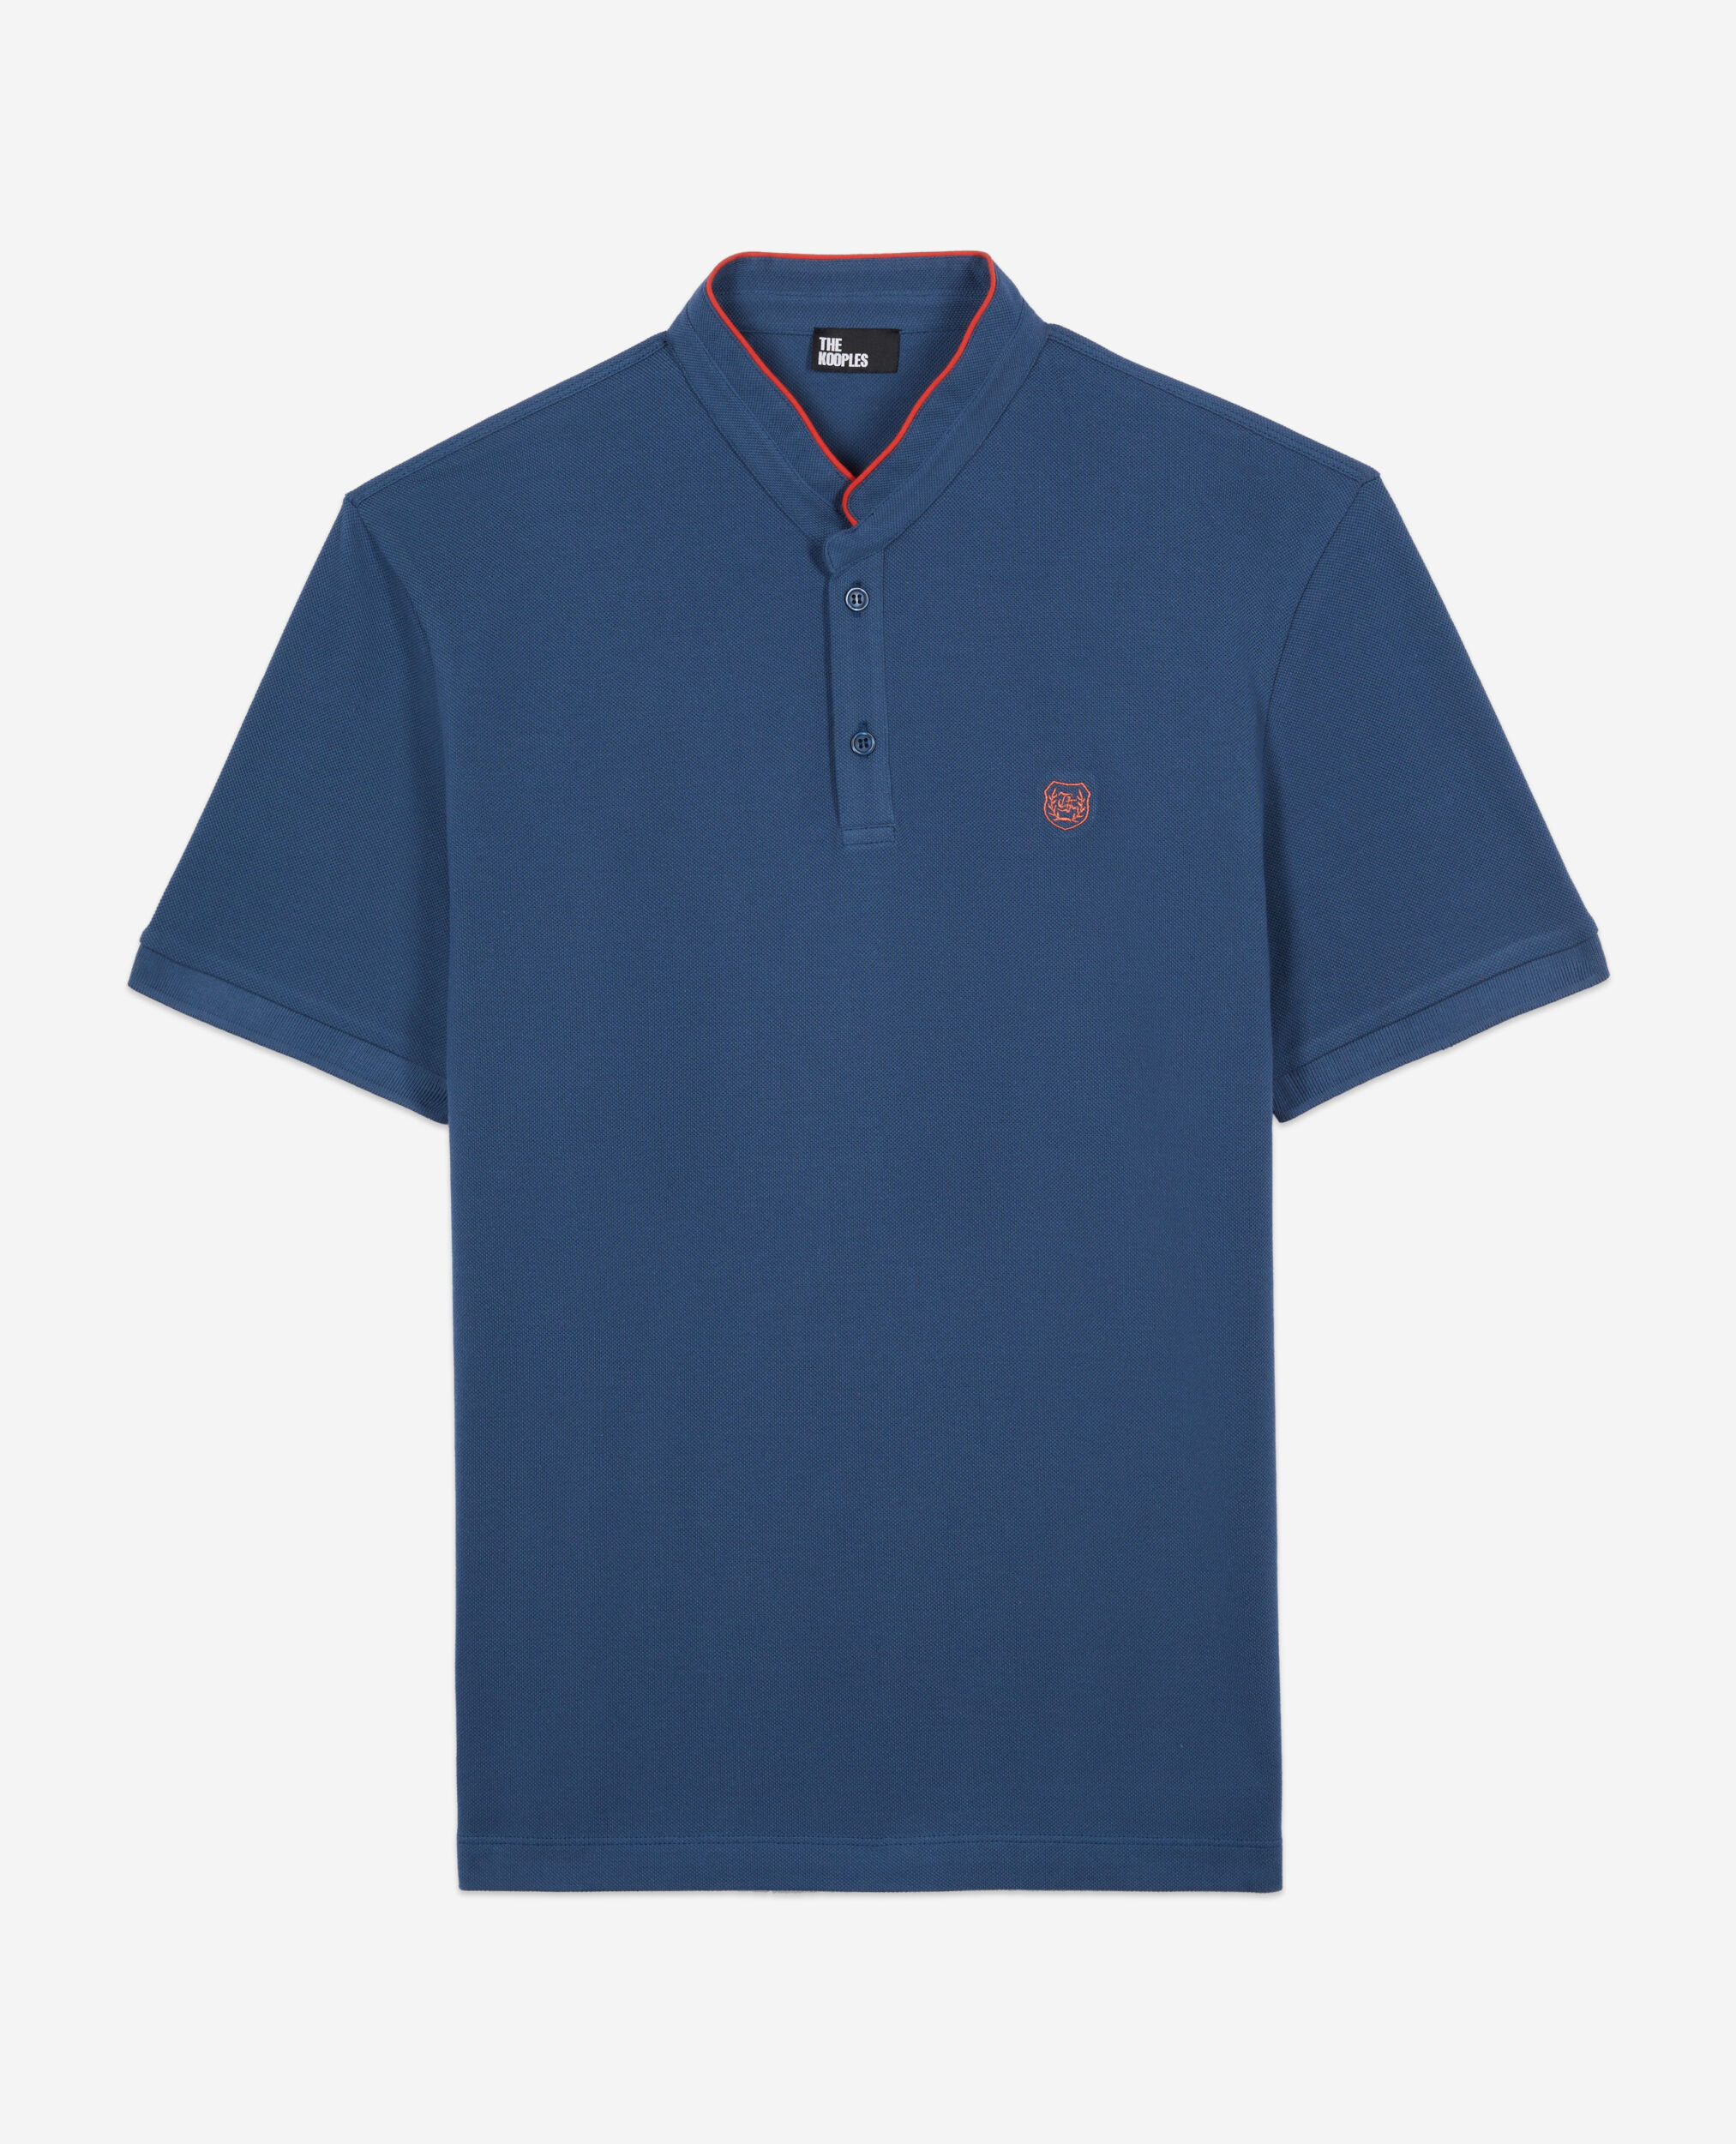 Royal blue cotton pique polo t-shirt, MIDDLE NAVY, hi-res image number null